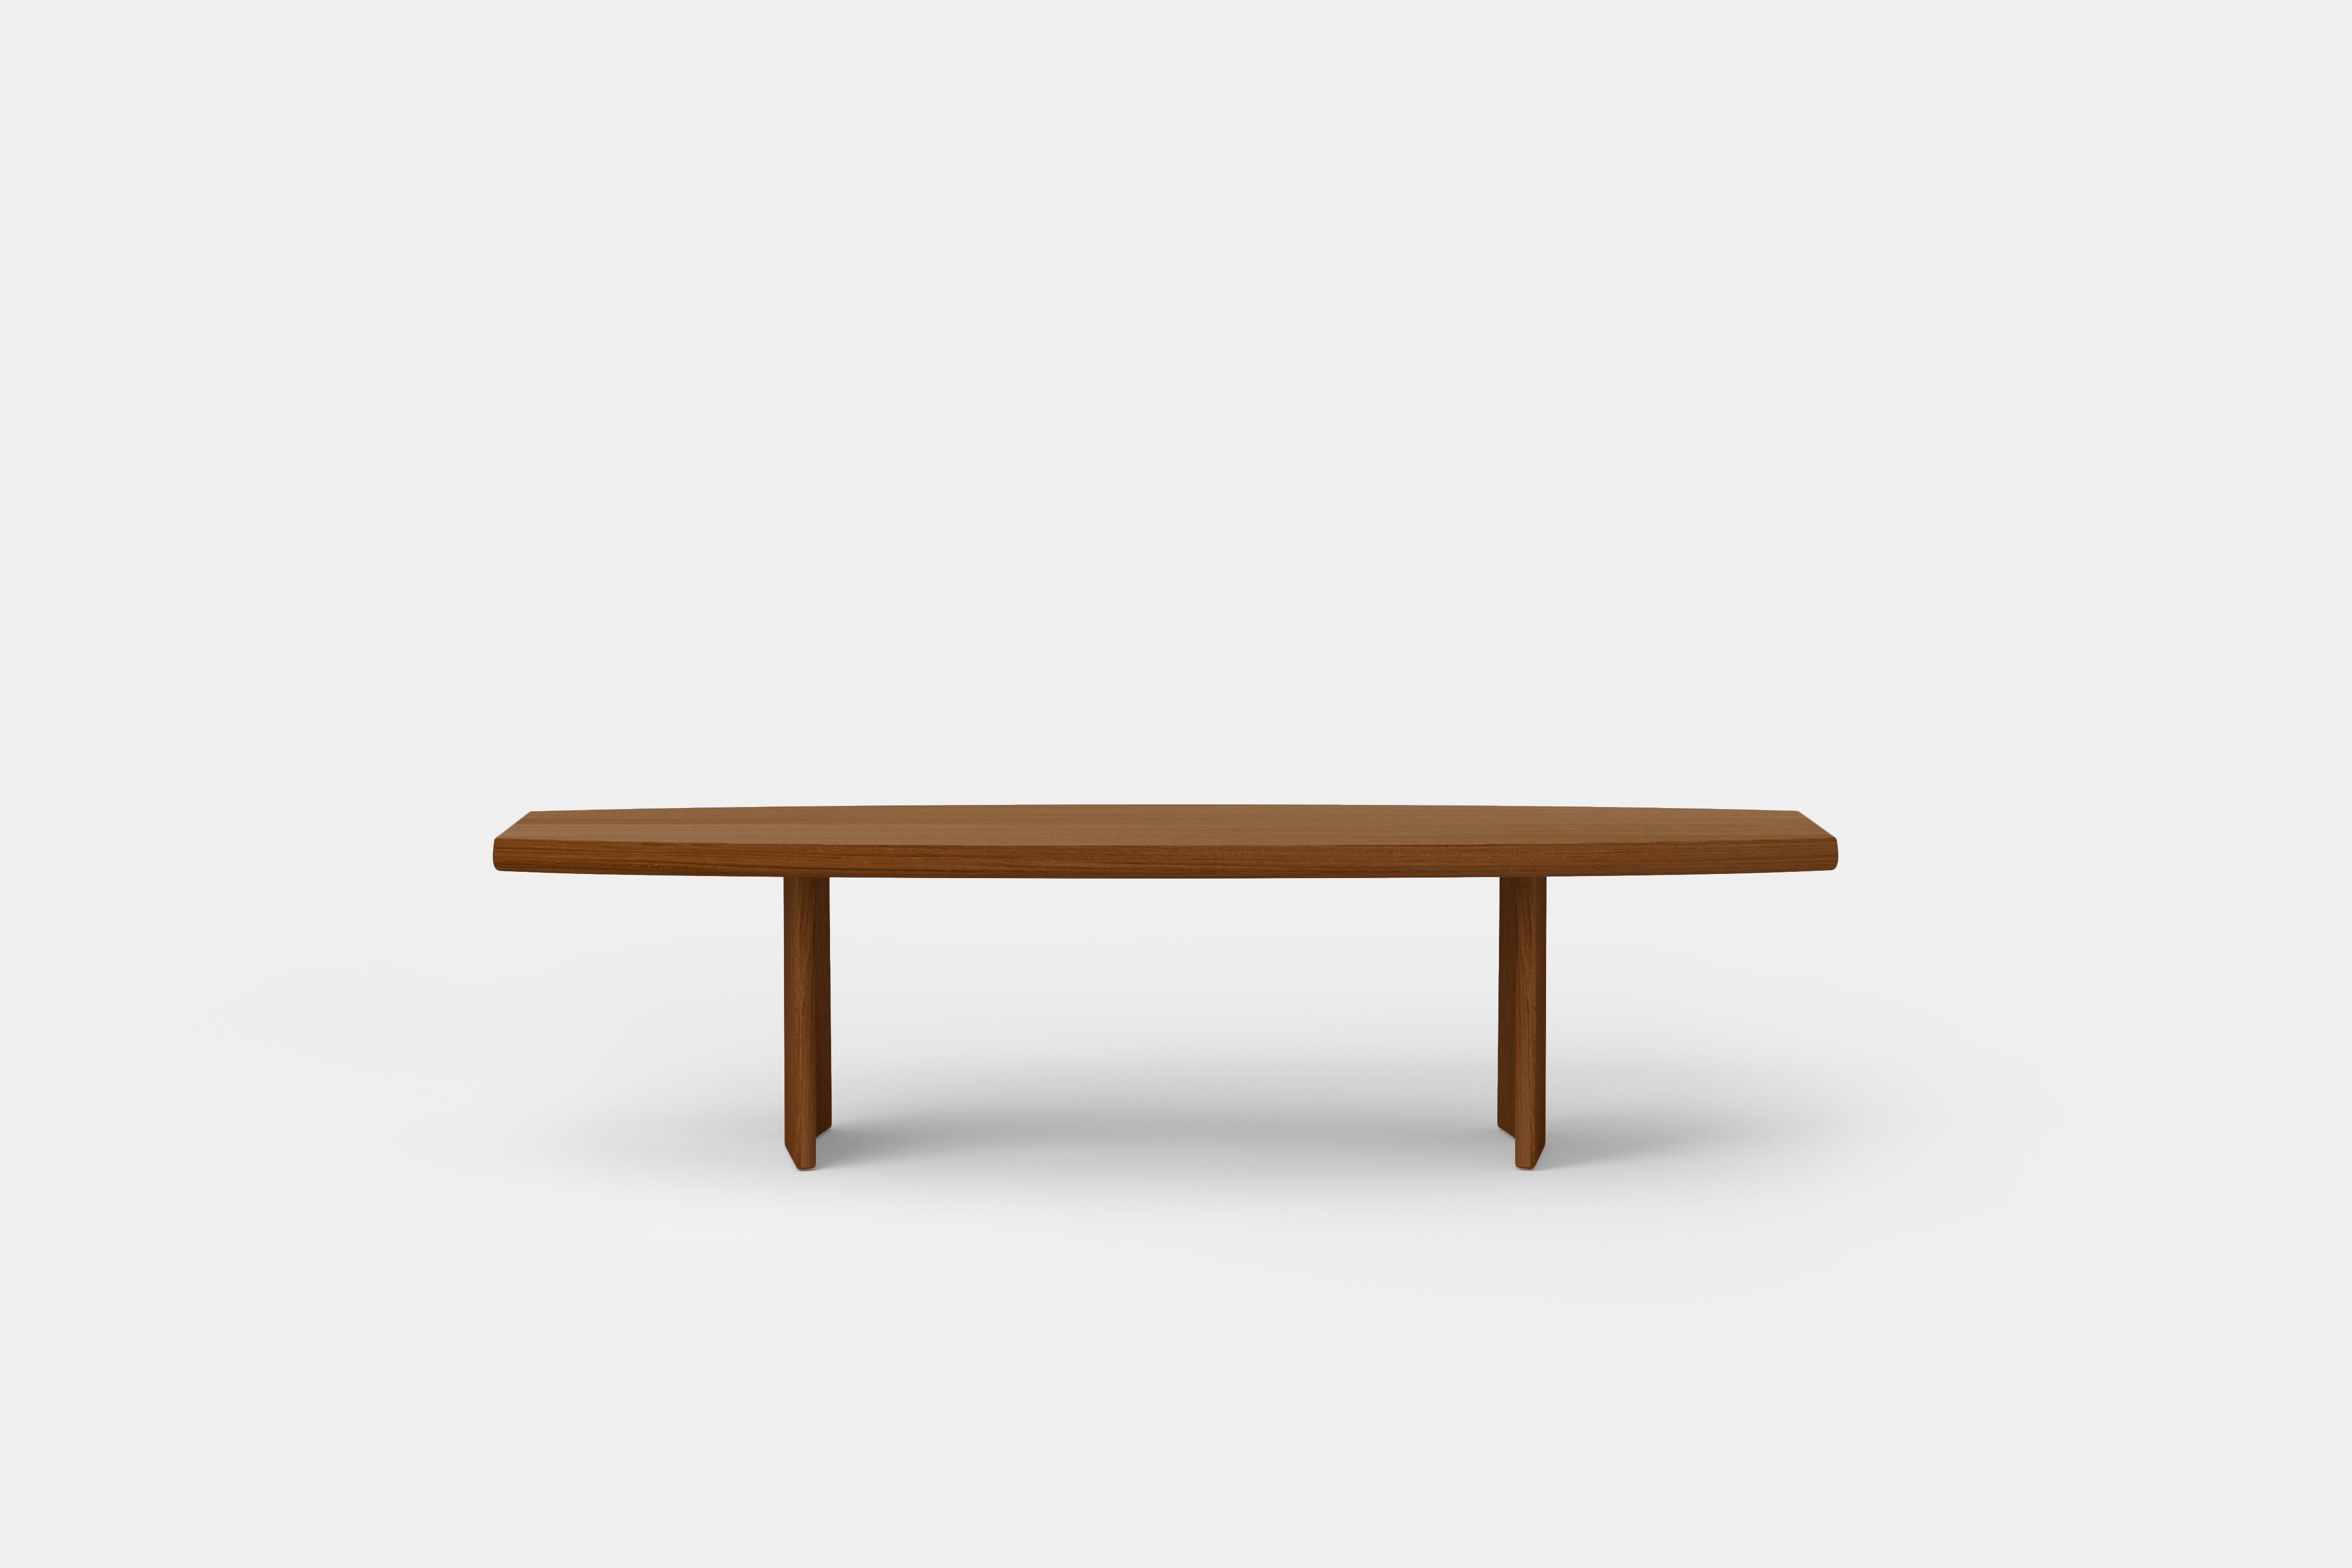 XXIe siècle et contemporain Peana Coffee Table, Bench in Red Tinted Solid Wood Finish by Joel Escalona en vente